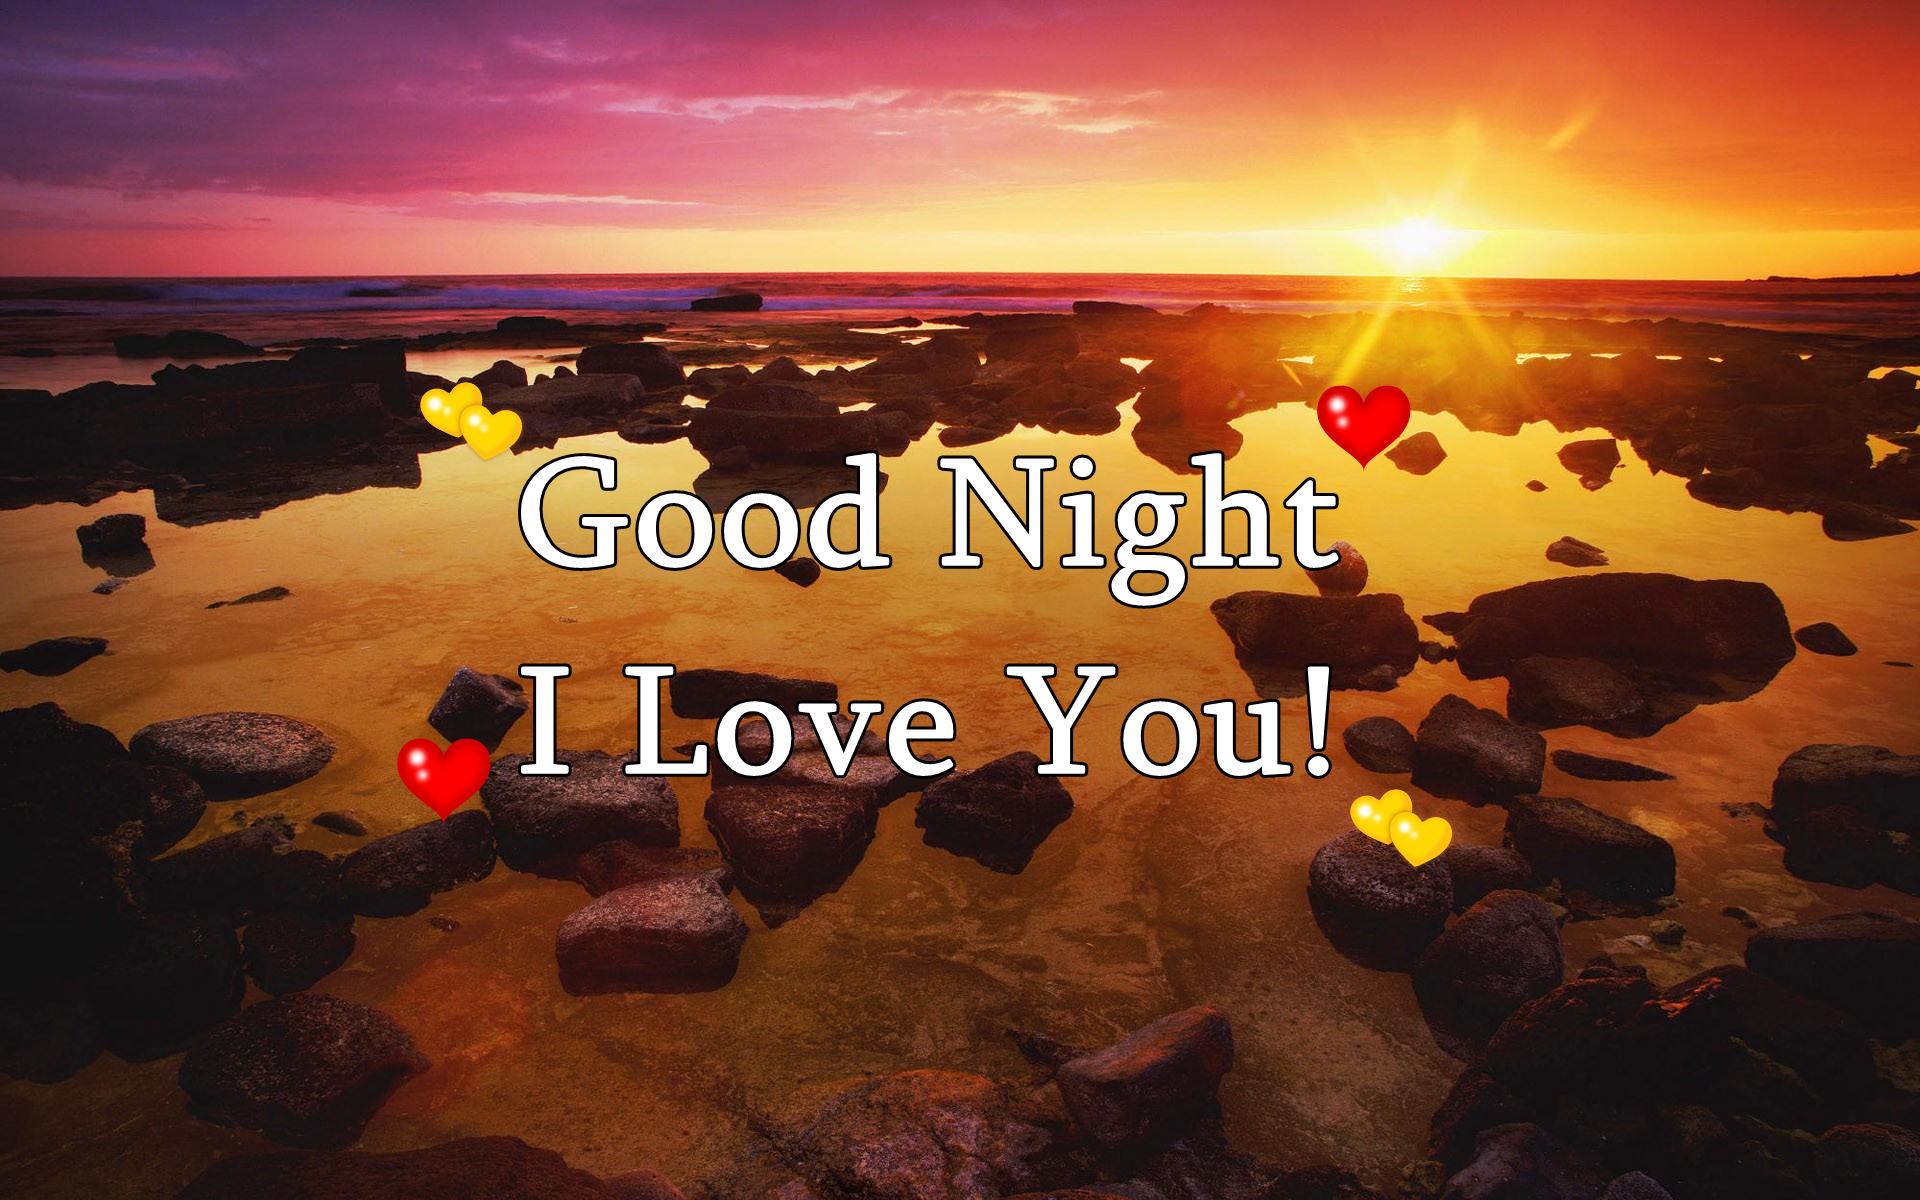 goodnight my love wallpaper,sky,sunset,natural landscape,text,morning